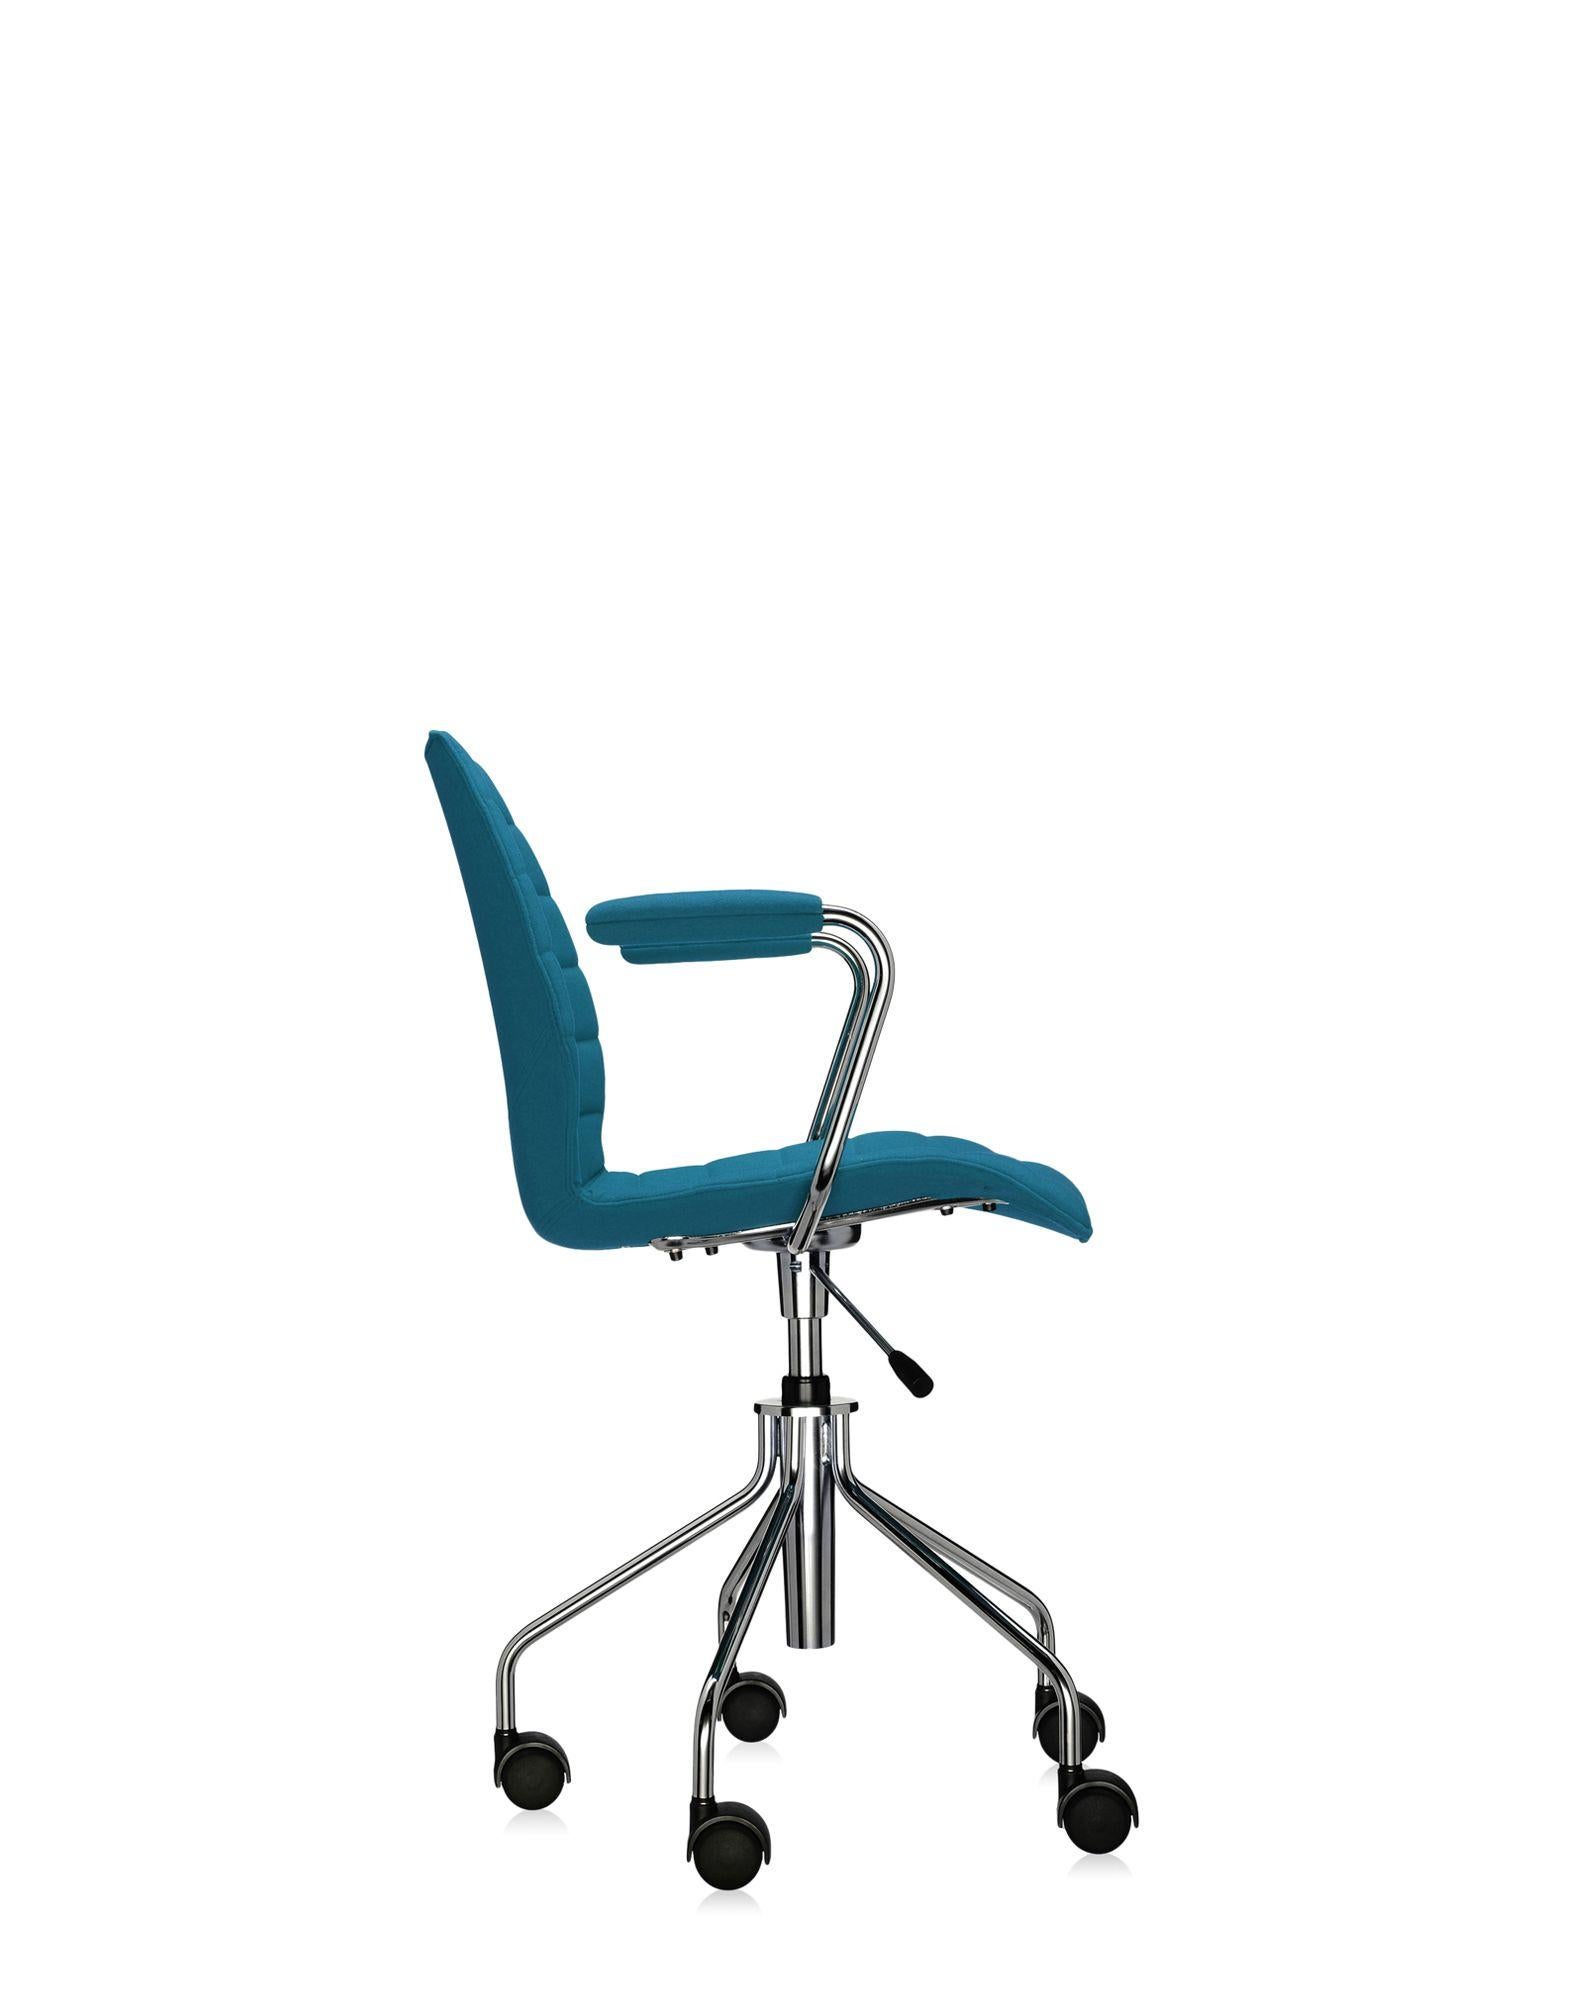 Modern Kartell Maui Soft Trevira ArmChair in Teal by Vico Magistretti